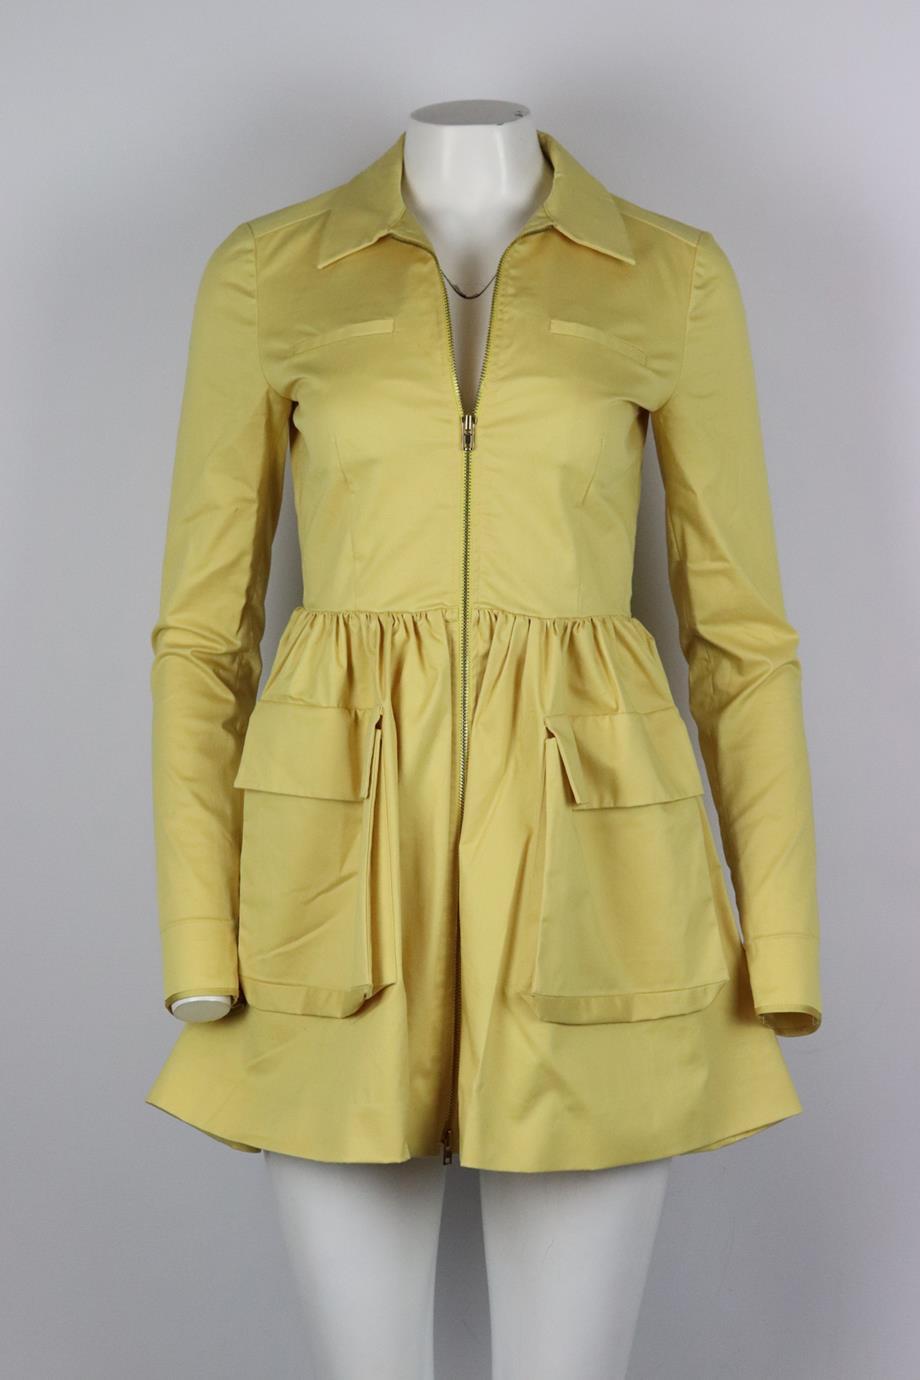 Miu Miu cotton blend mini dress. Yellow. Long sleeve, crewneck. Zip fastening at front. 95% Cotton, 5% elastane; lining: 50% acetate, 50% polyester. Size: IT 40 (UK 8, US 4, FR 36). Bust: 33.8 in. Waist: 27.8 in. Hips: 53 in. Length: 31.5 in. Very